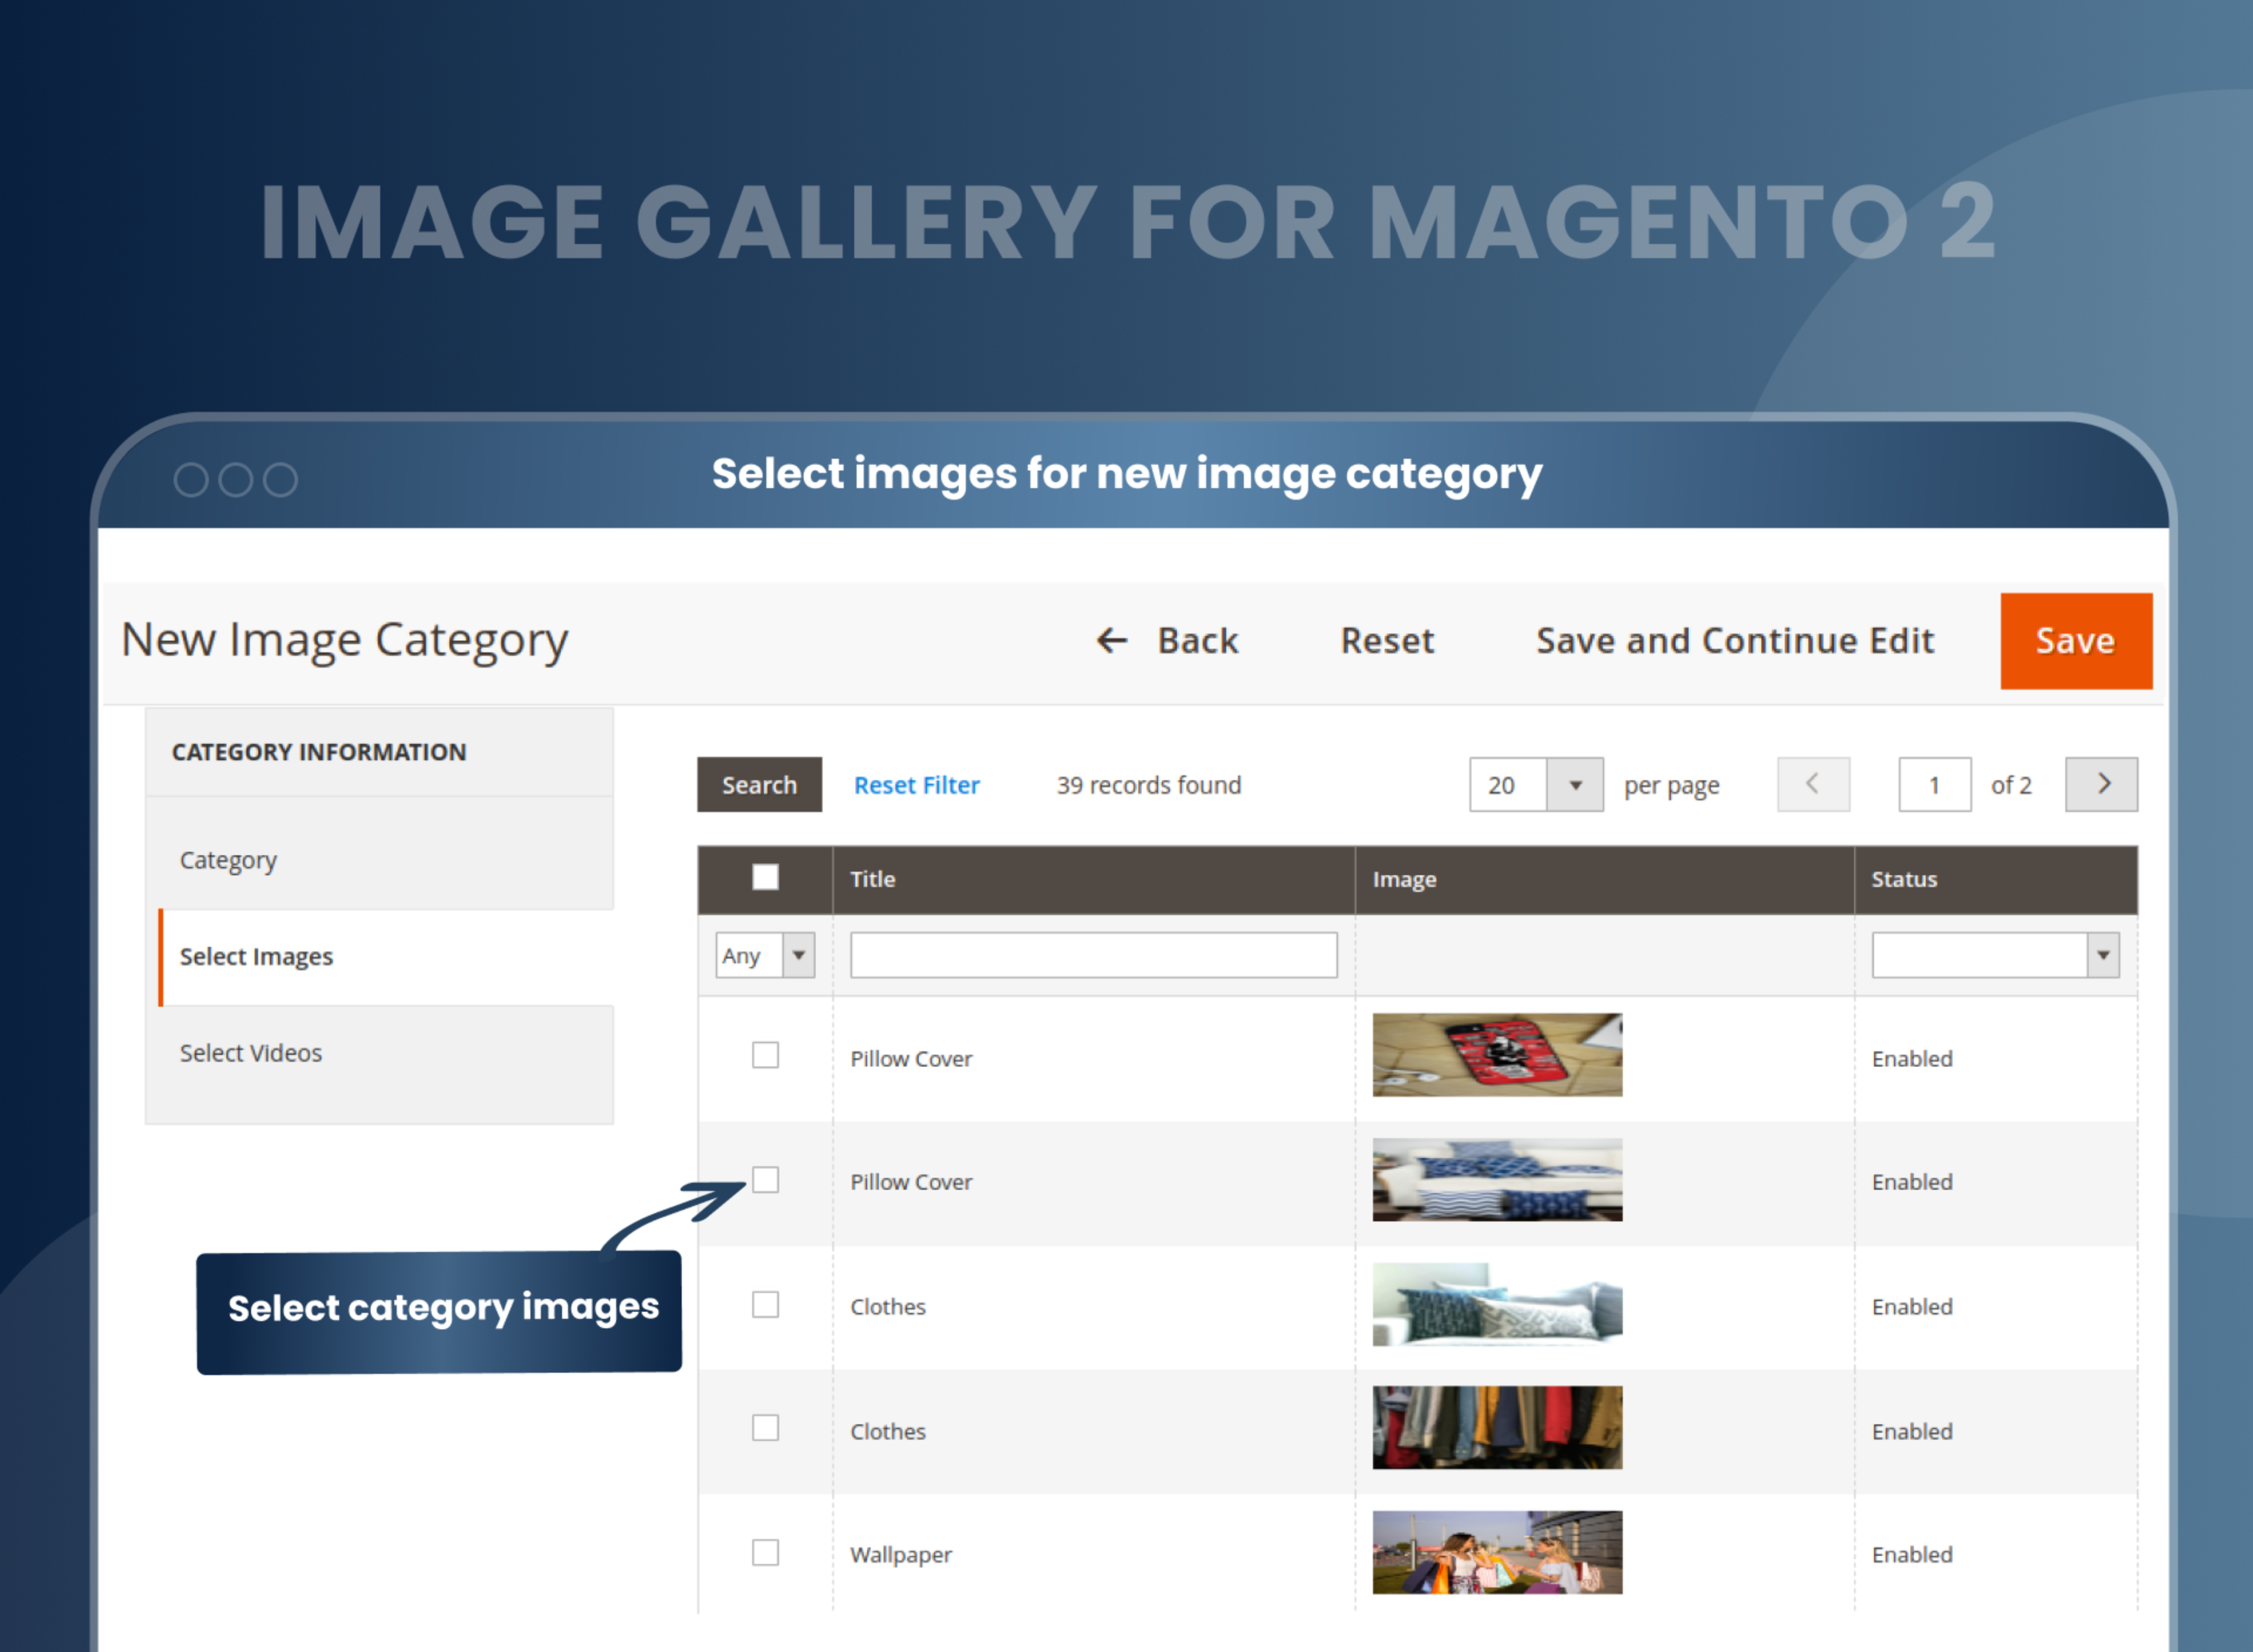 Select images for new image category